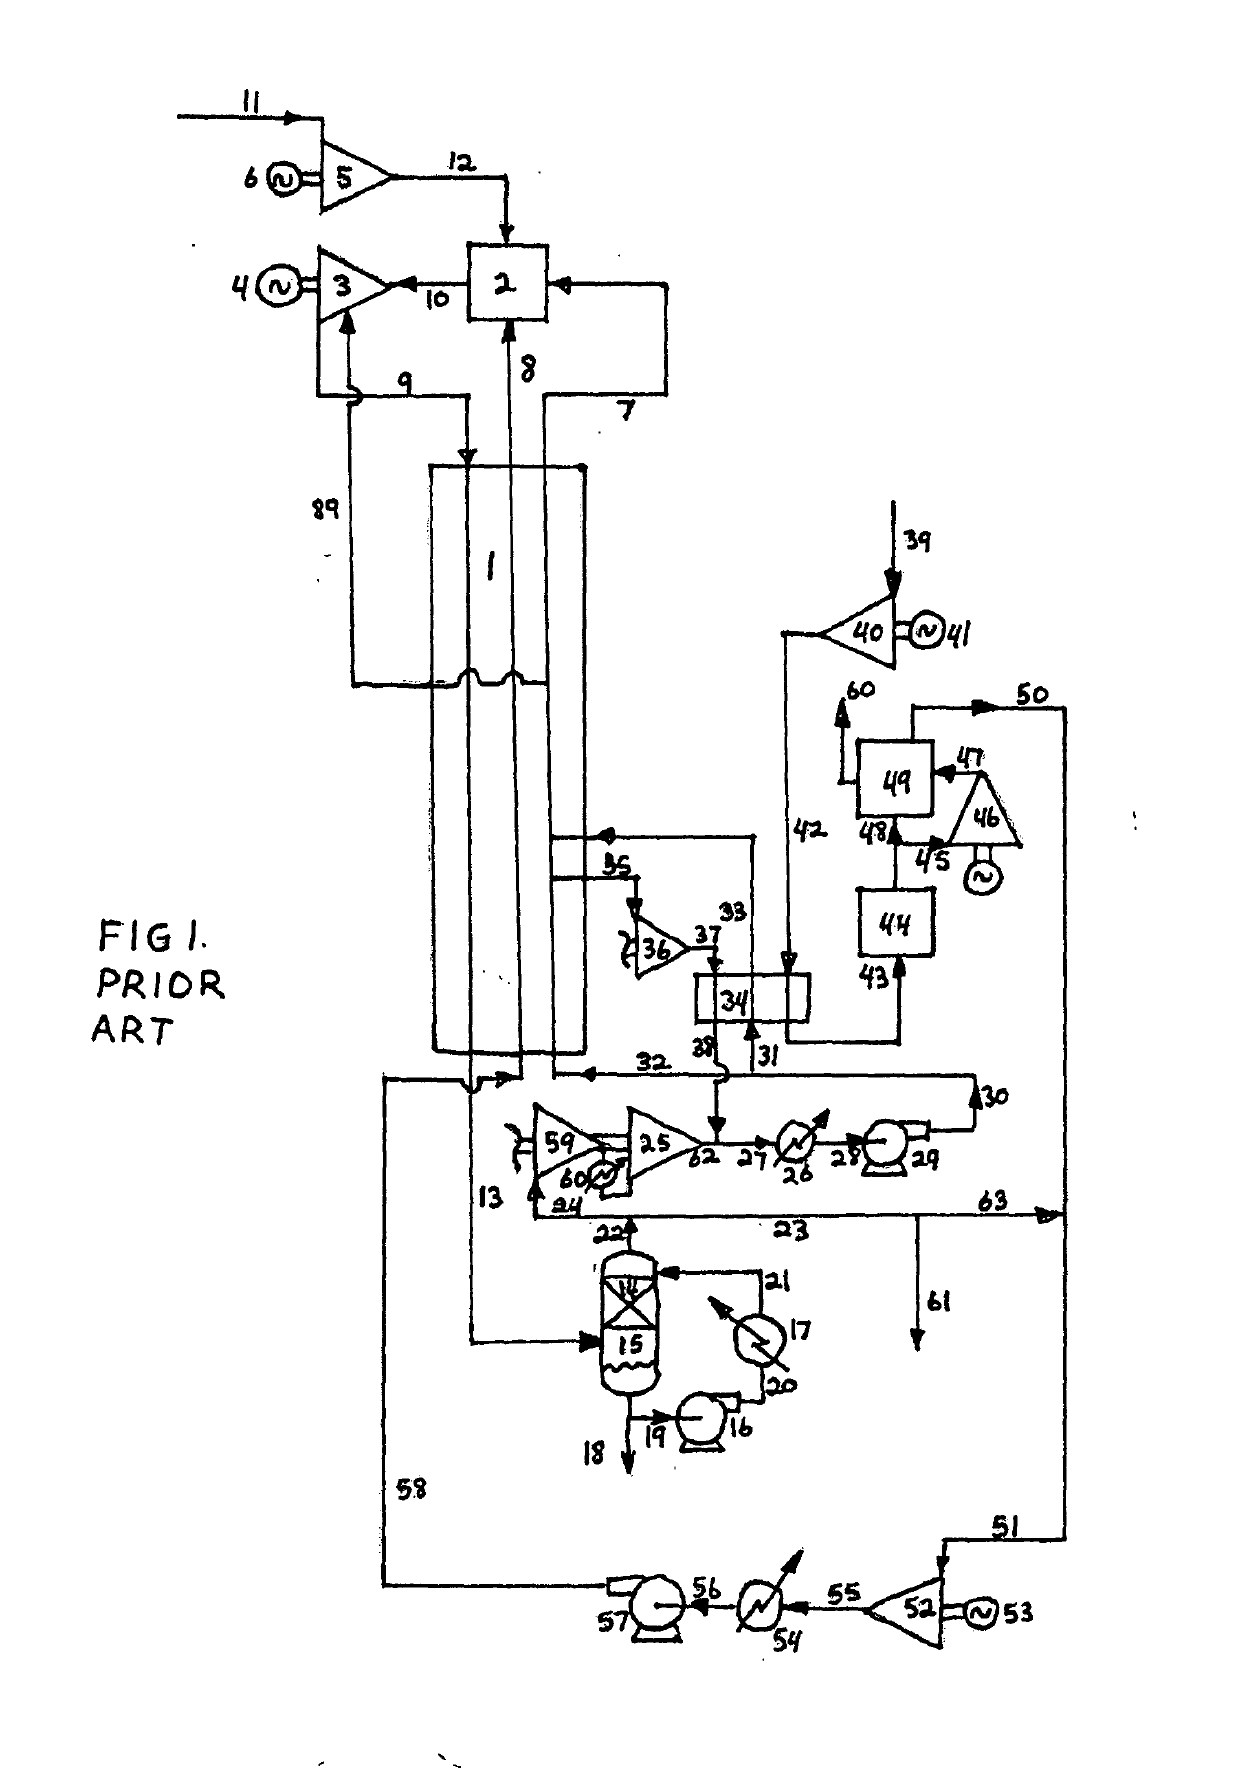 Systems and methods for power production using a carbon dioxide working fluid